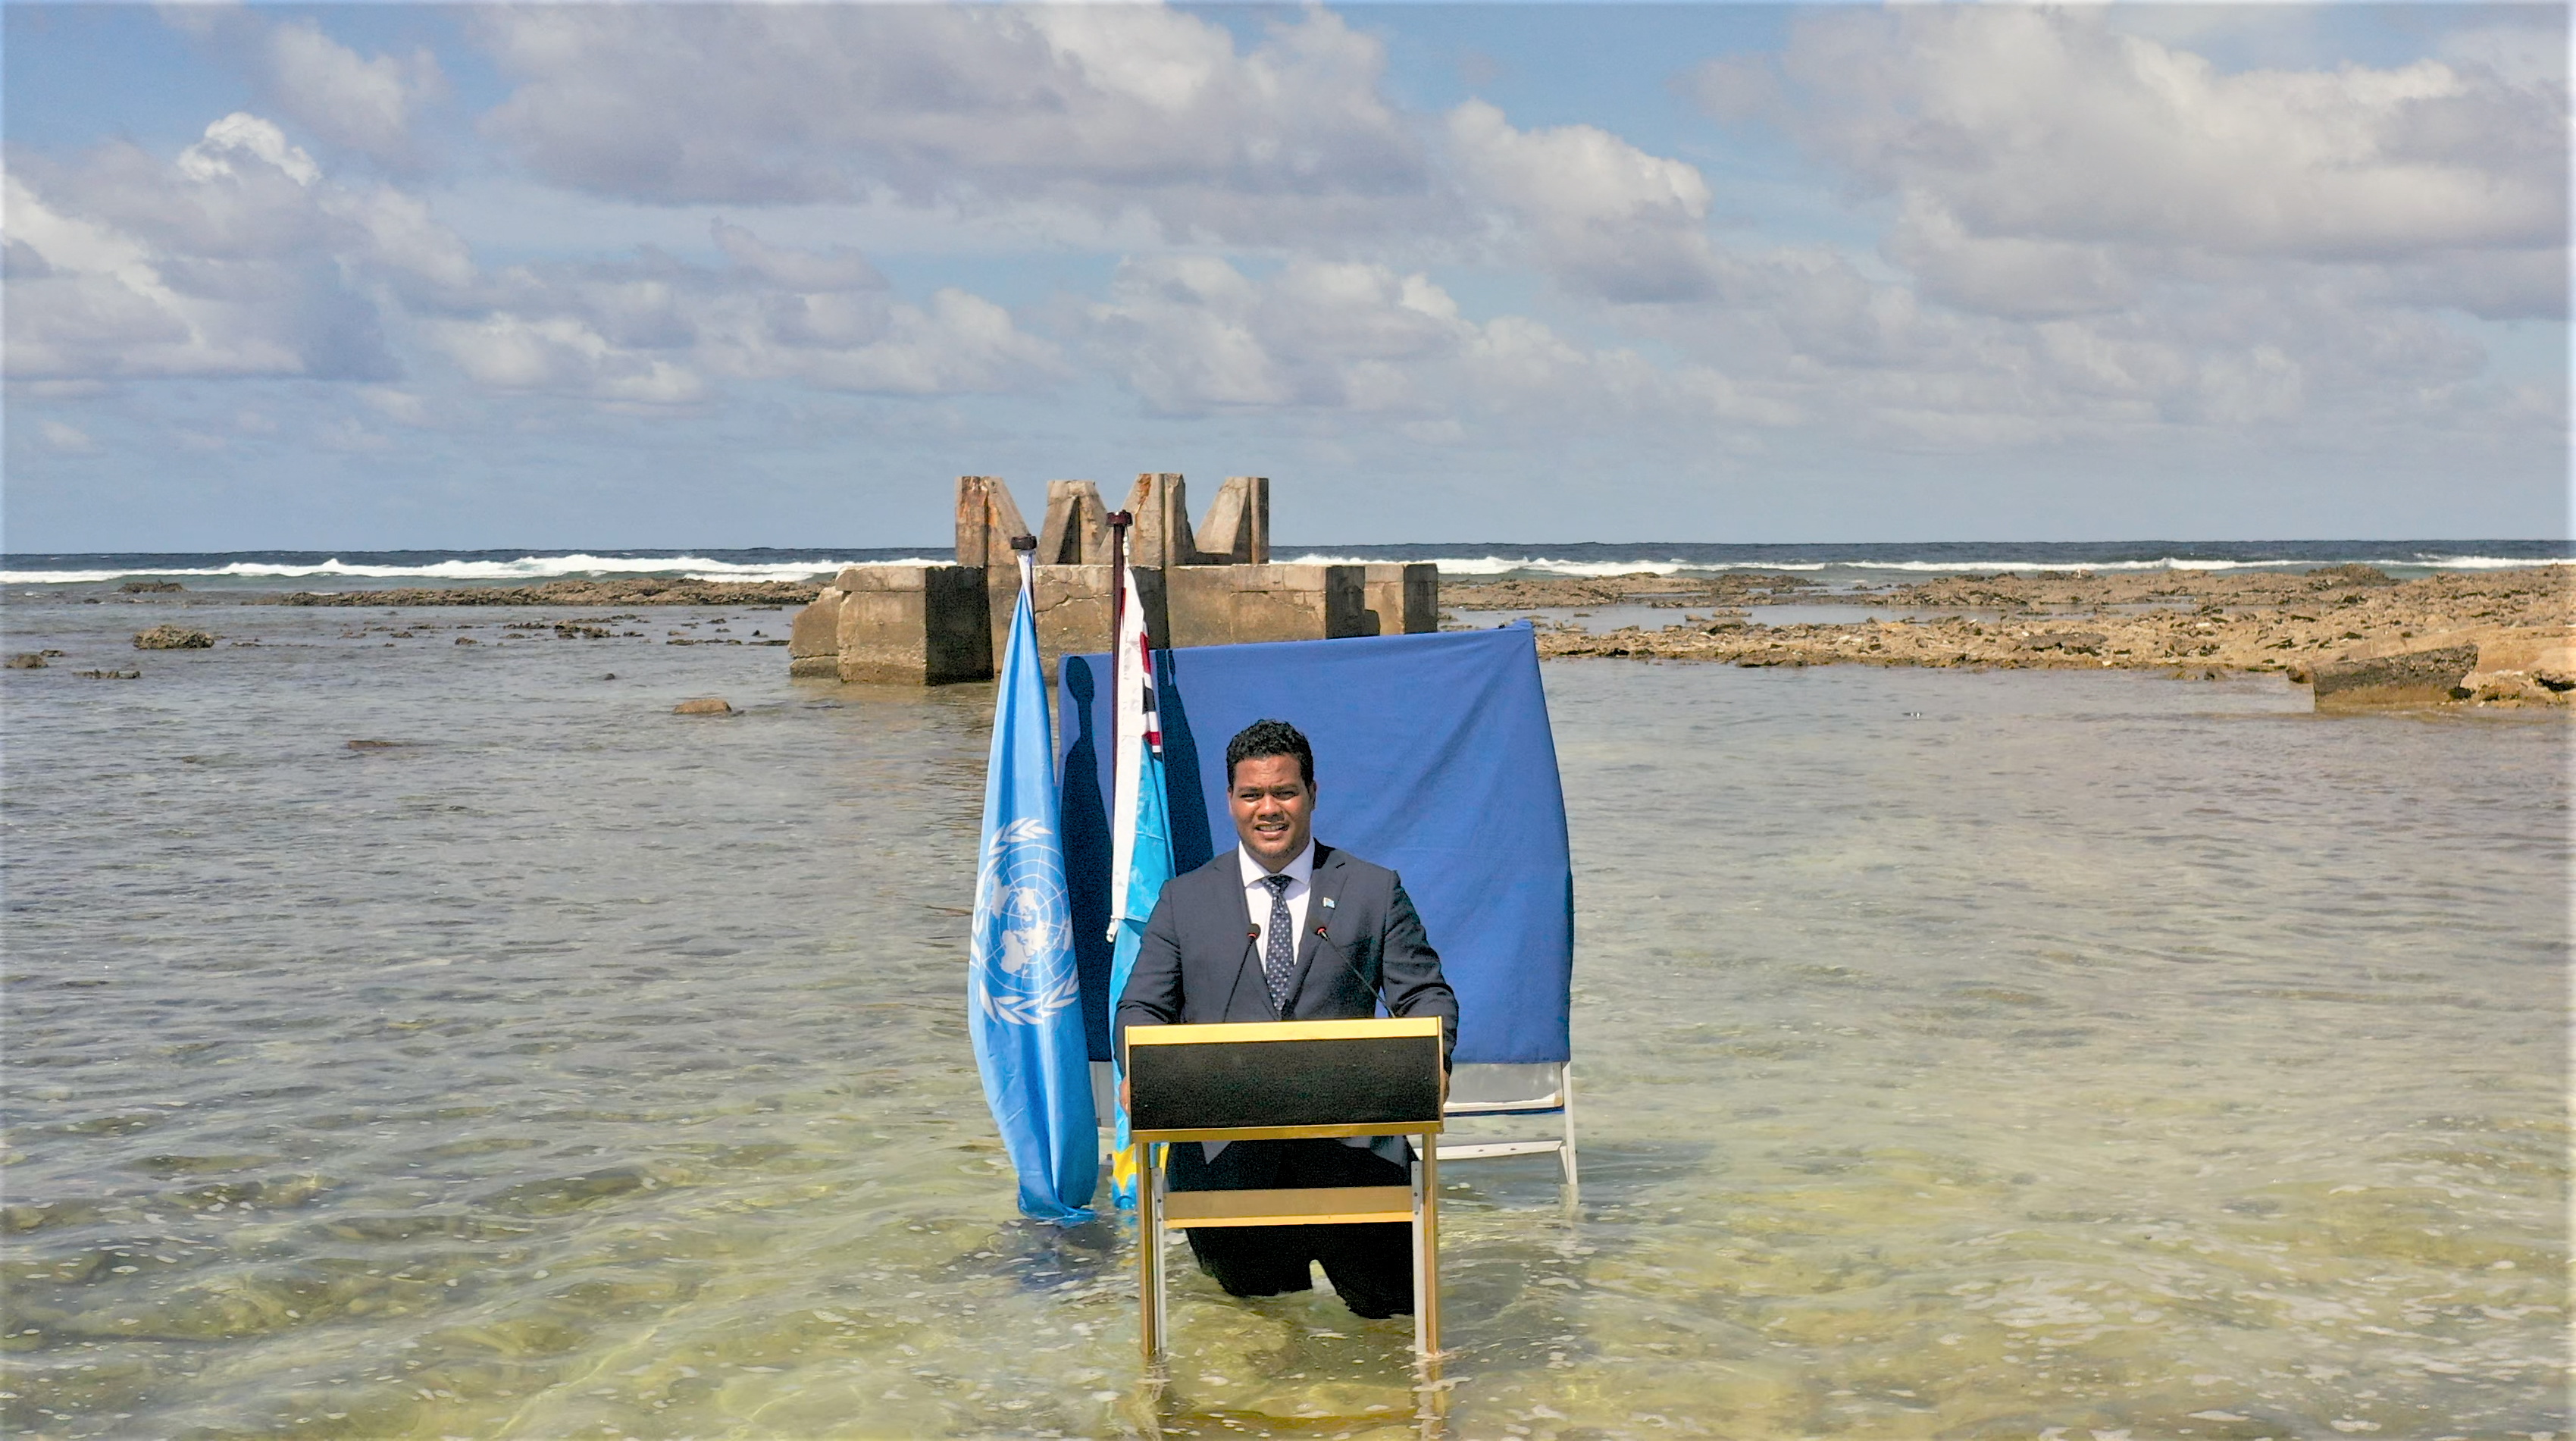 Tuvalu's Foreign Minister Simon Kofe gives a COP26 statement while standing in the ocean, in Funafuti